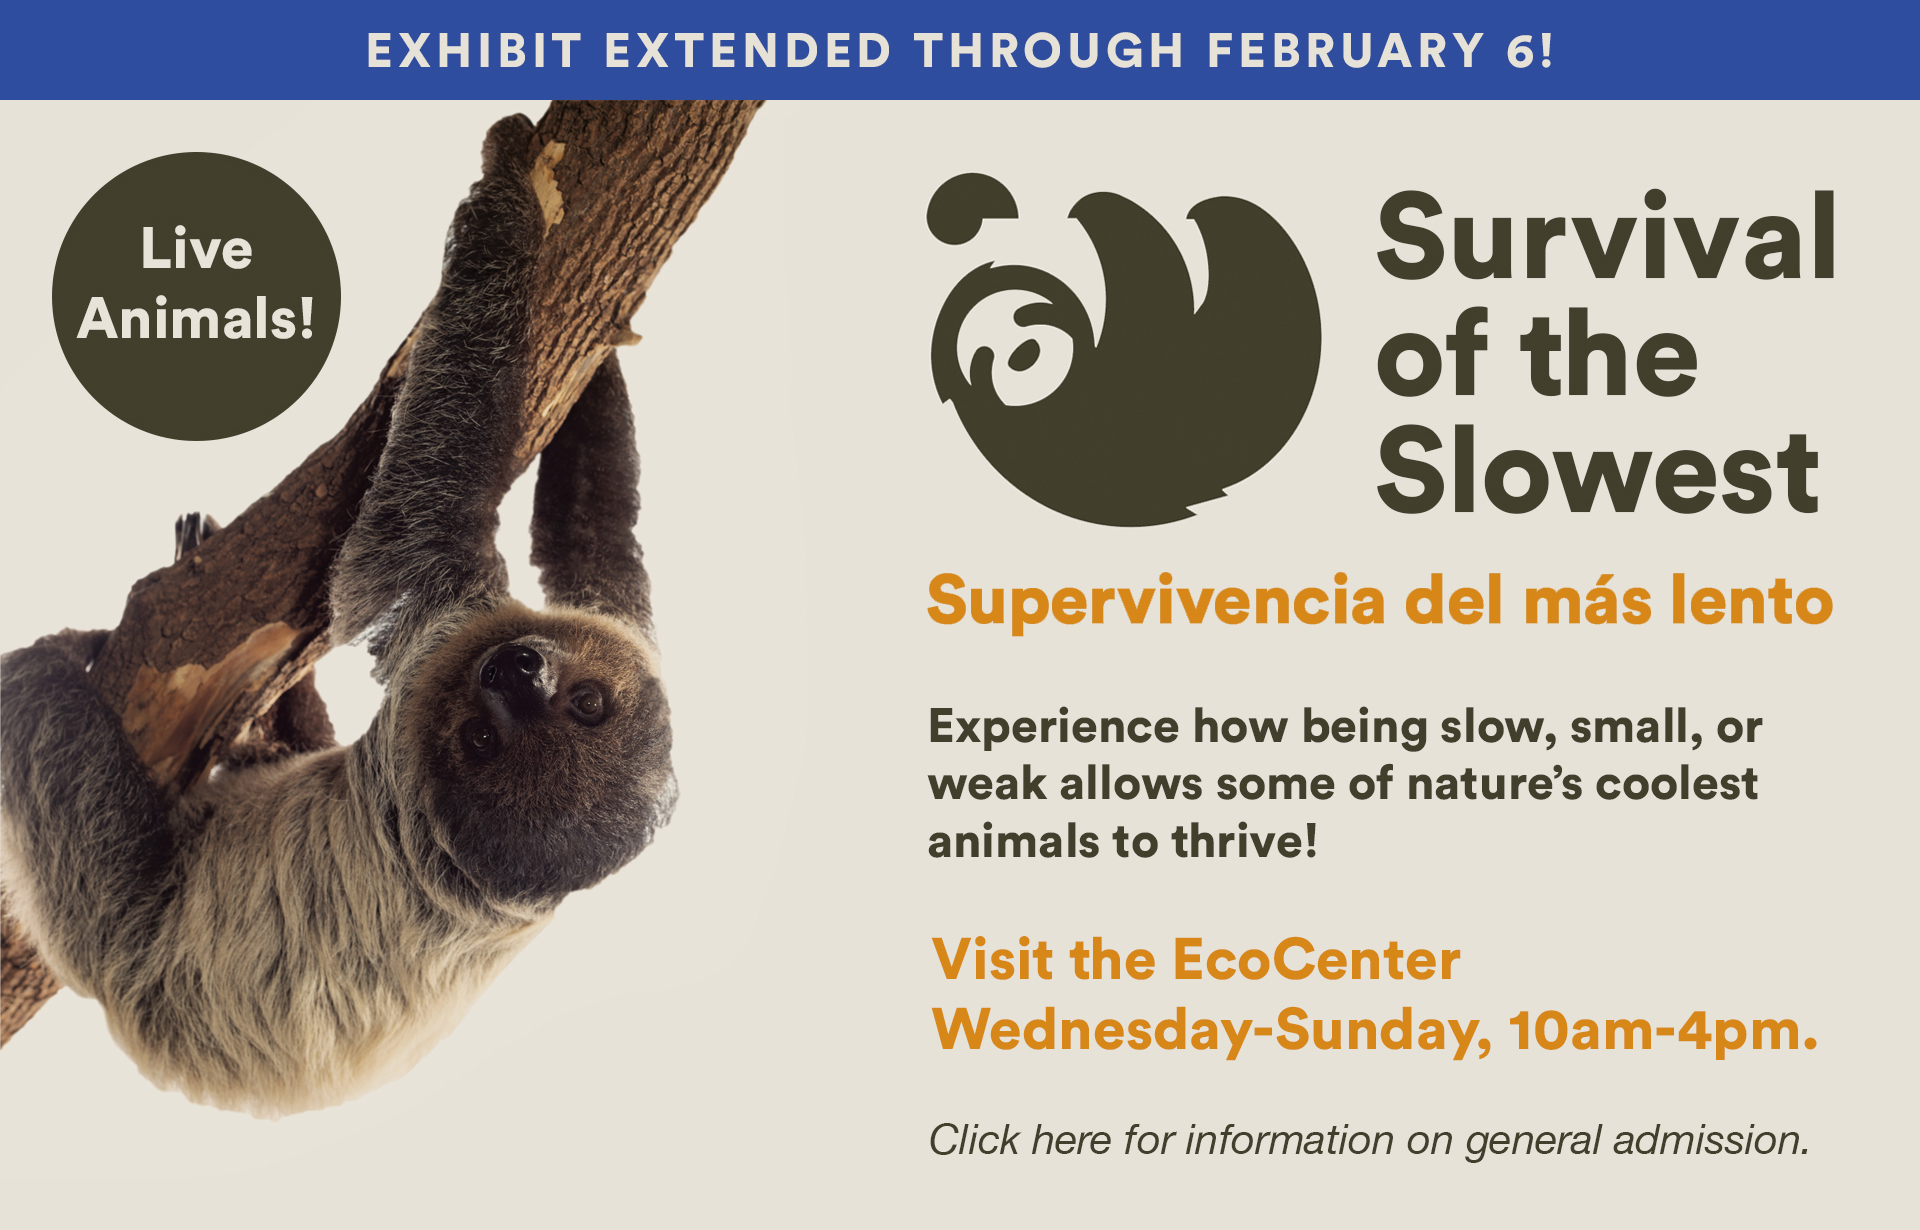 Survival of the Slowest extended to February 6!